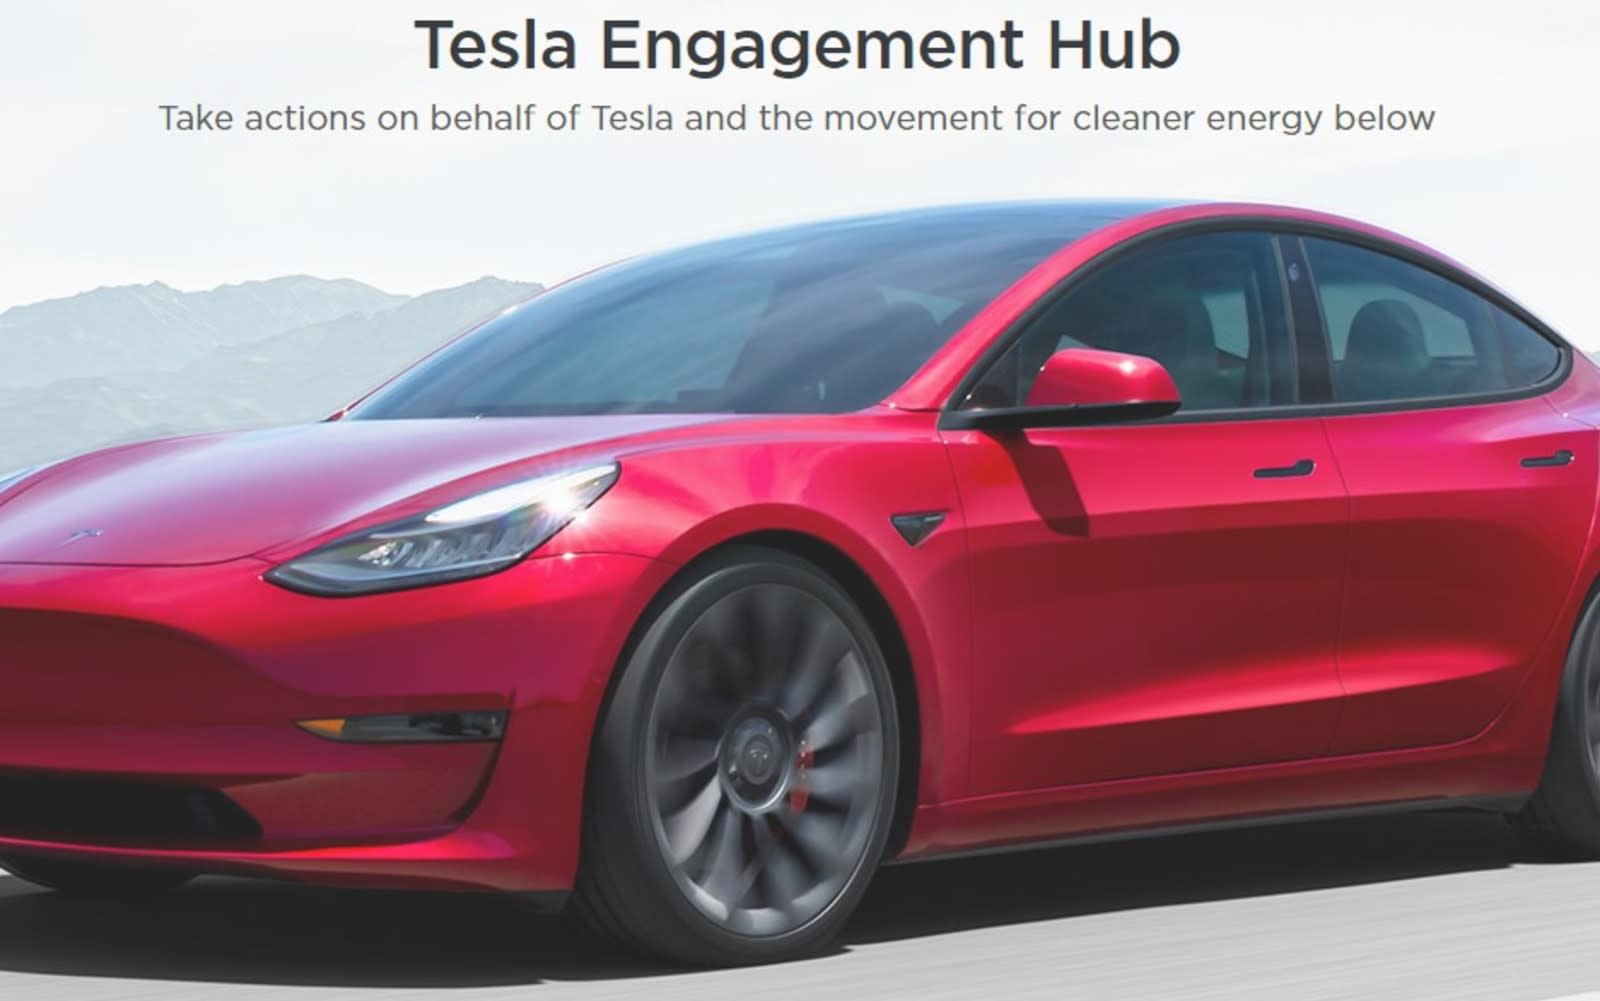 Tesla closes forums and pushes fans to take political action with Engage